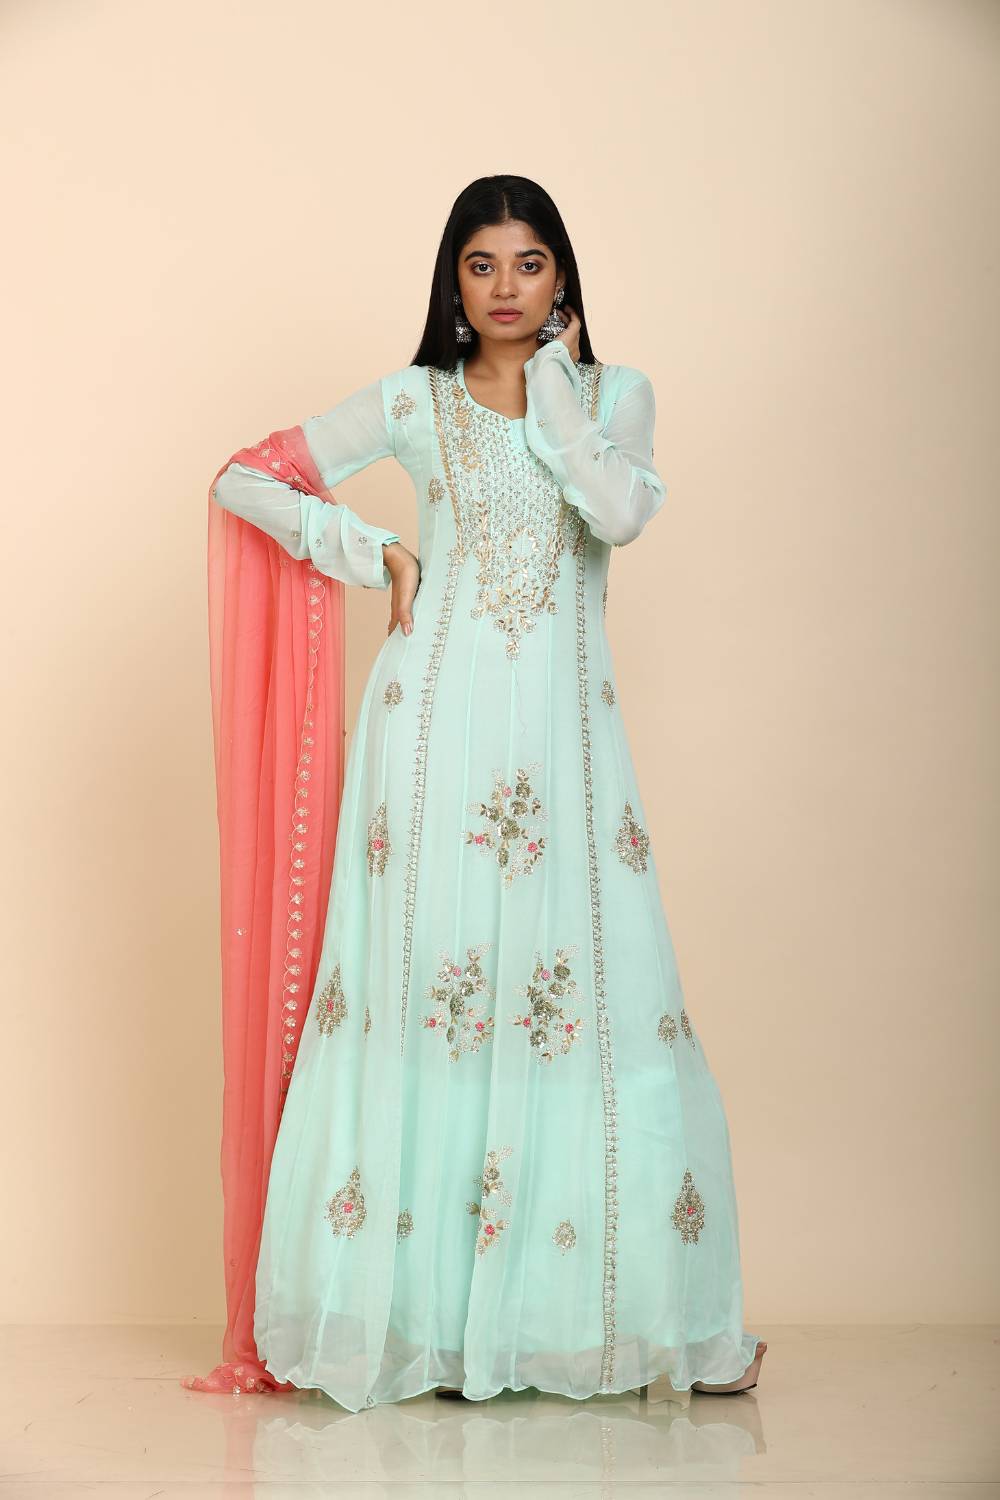 Mint green Anarkali suit with gota zari moti and floral embroidery